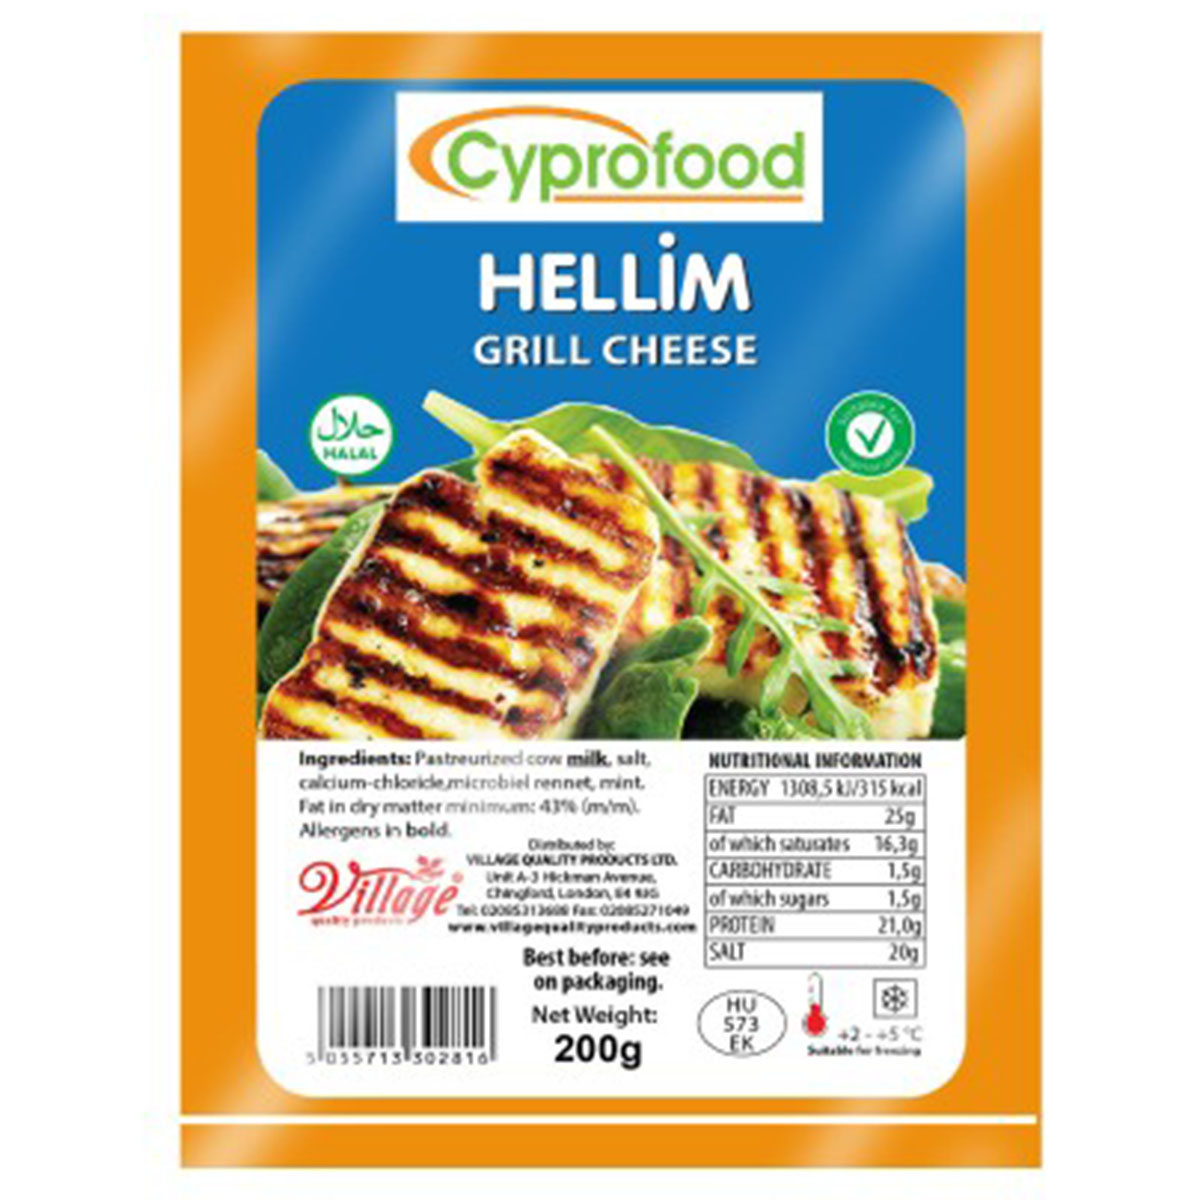 Cyprofood - Hellim Grill Cheese - 200g - Continental Food Store